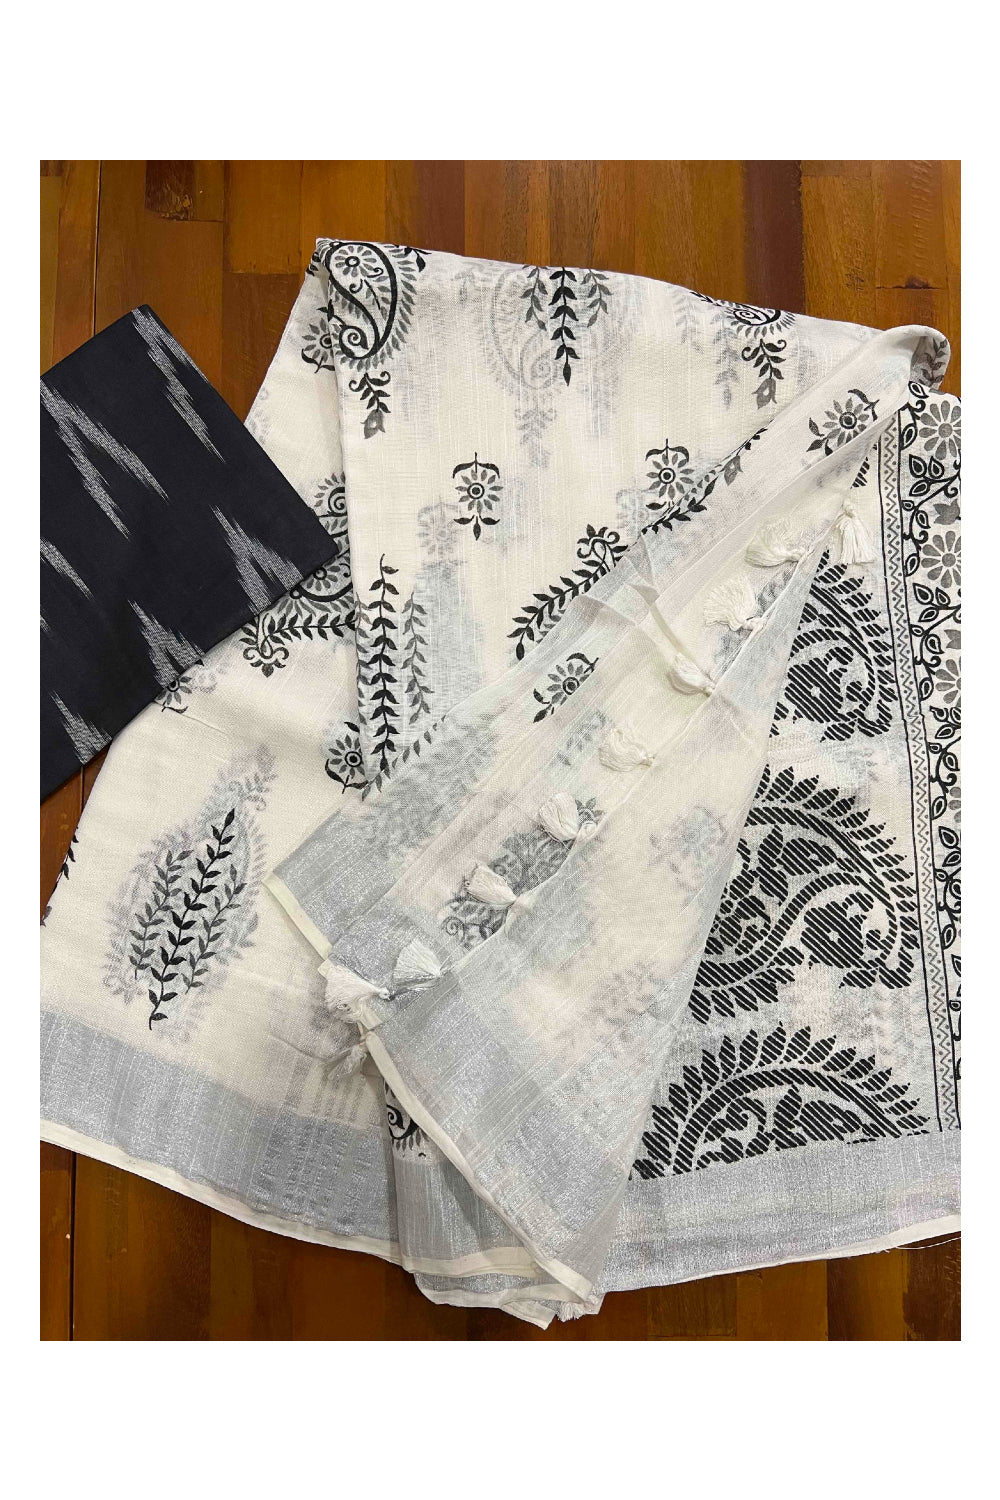 Southloom Linen Designer Saree in White and Black Printed with Tassels